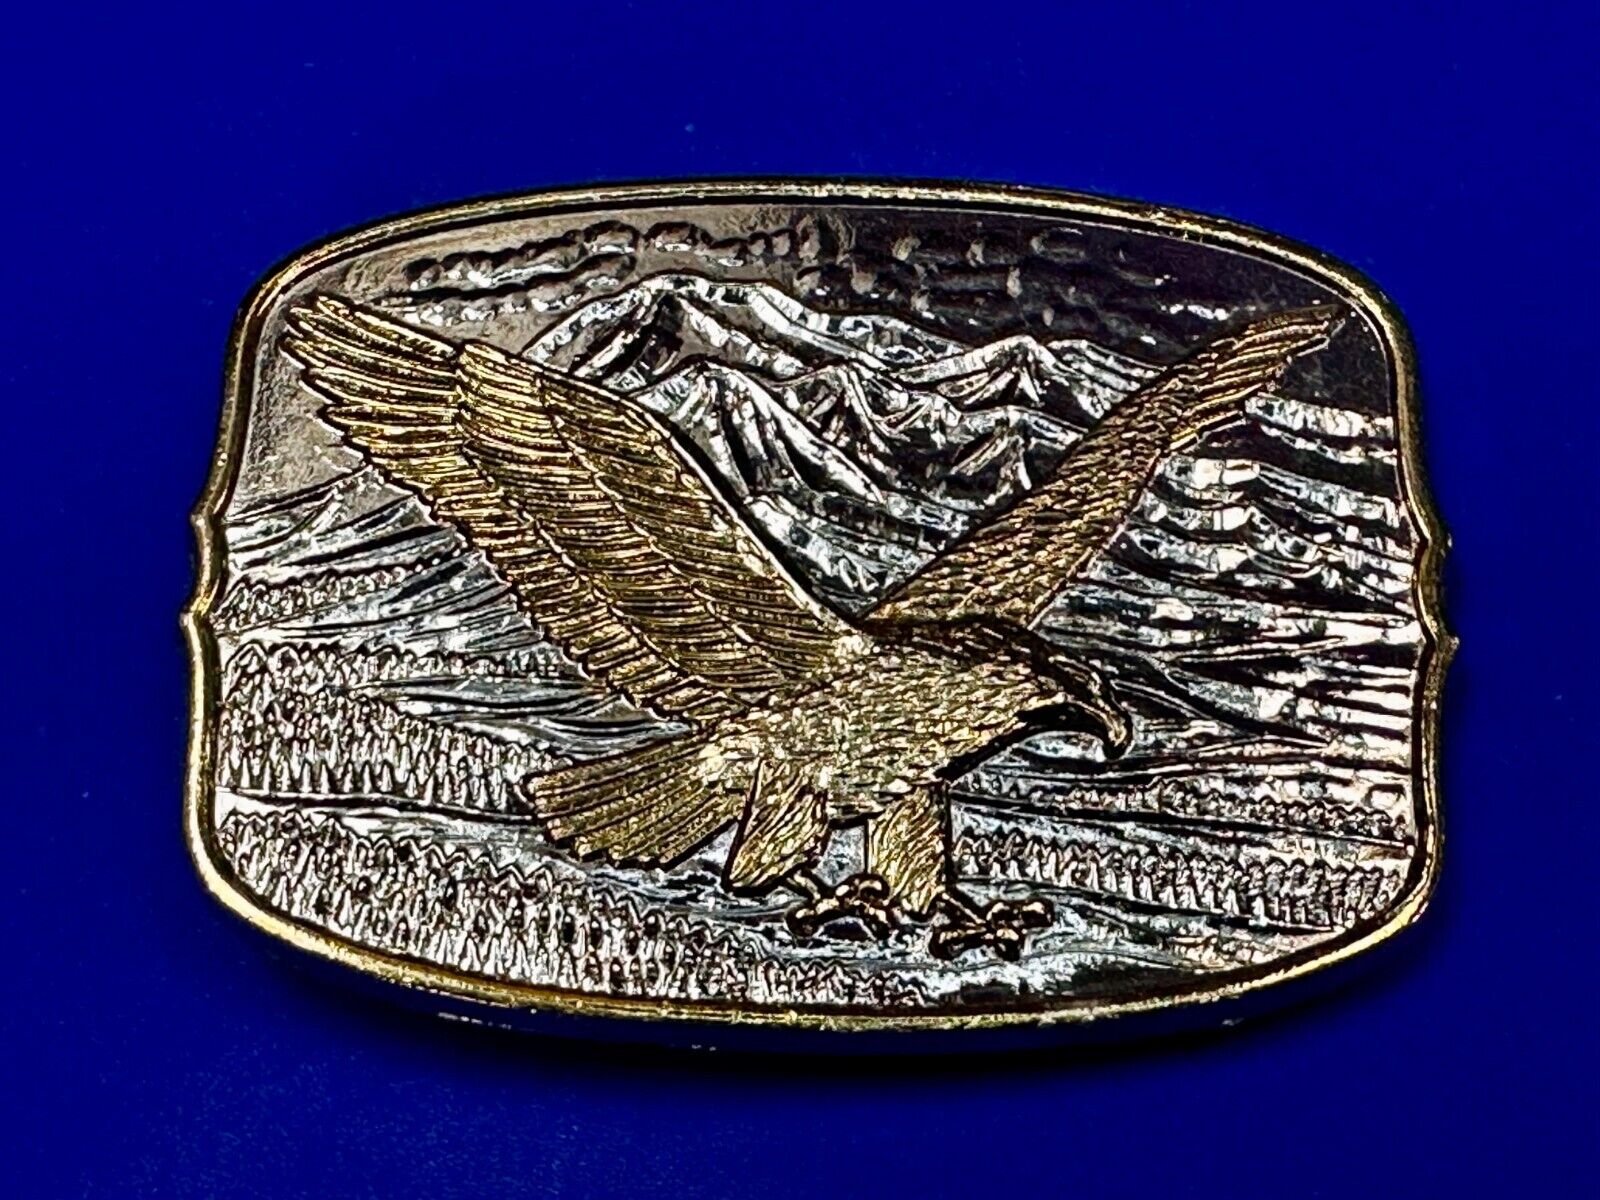 Majestic American Bald Eagle Flying high USA Mountains Two Tone Belt Buckle